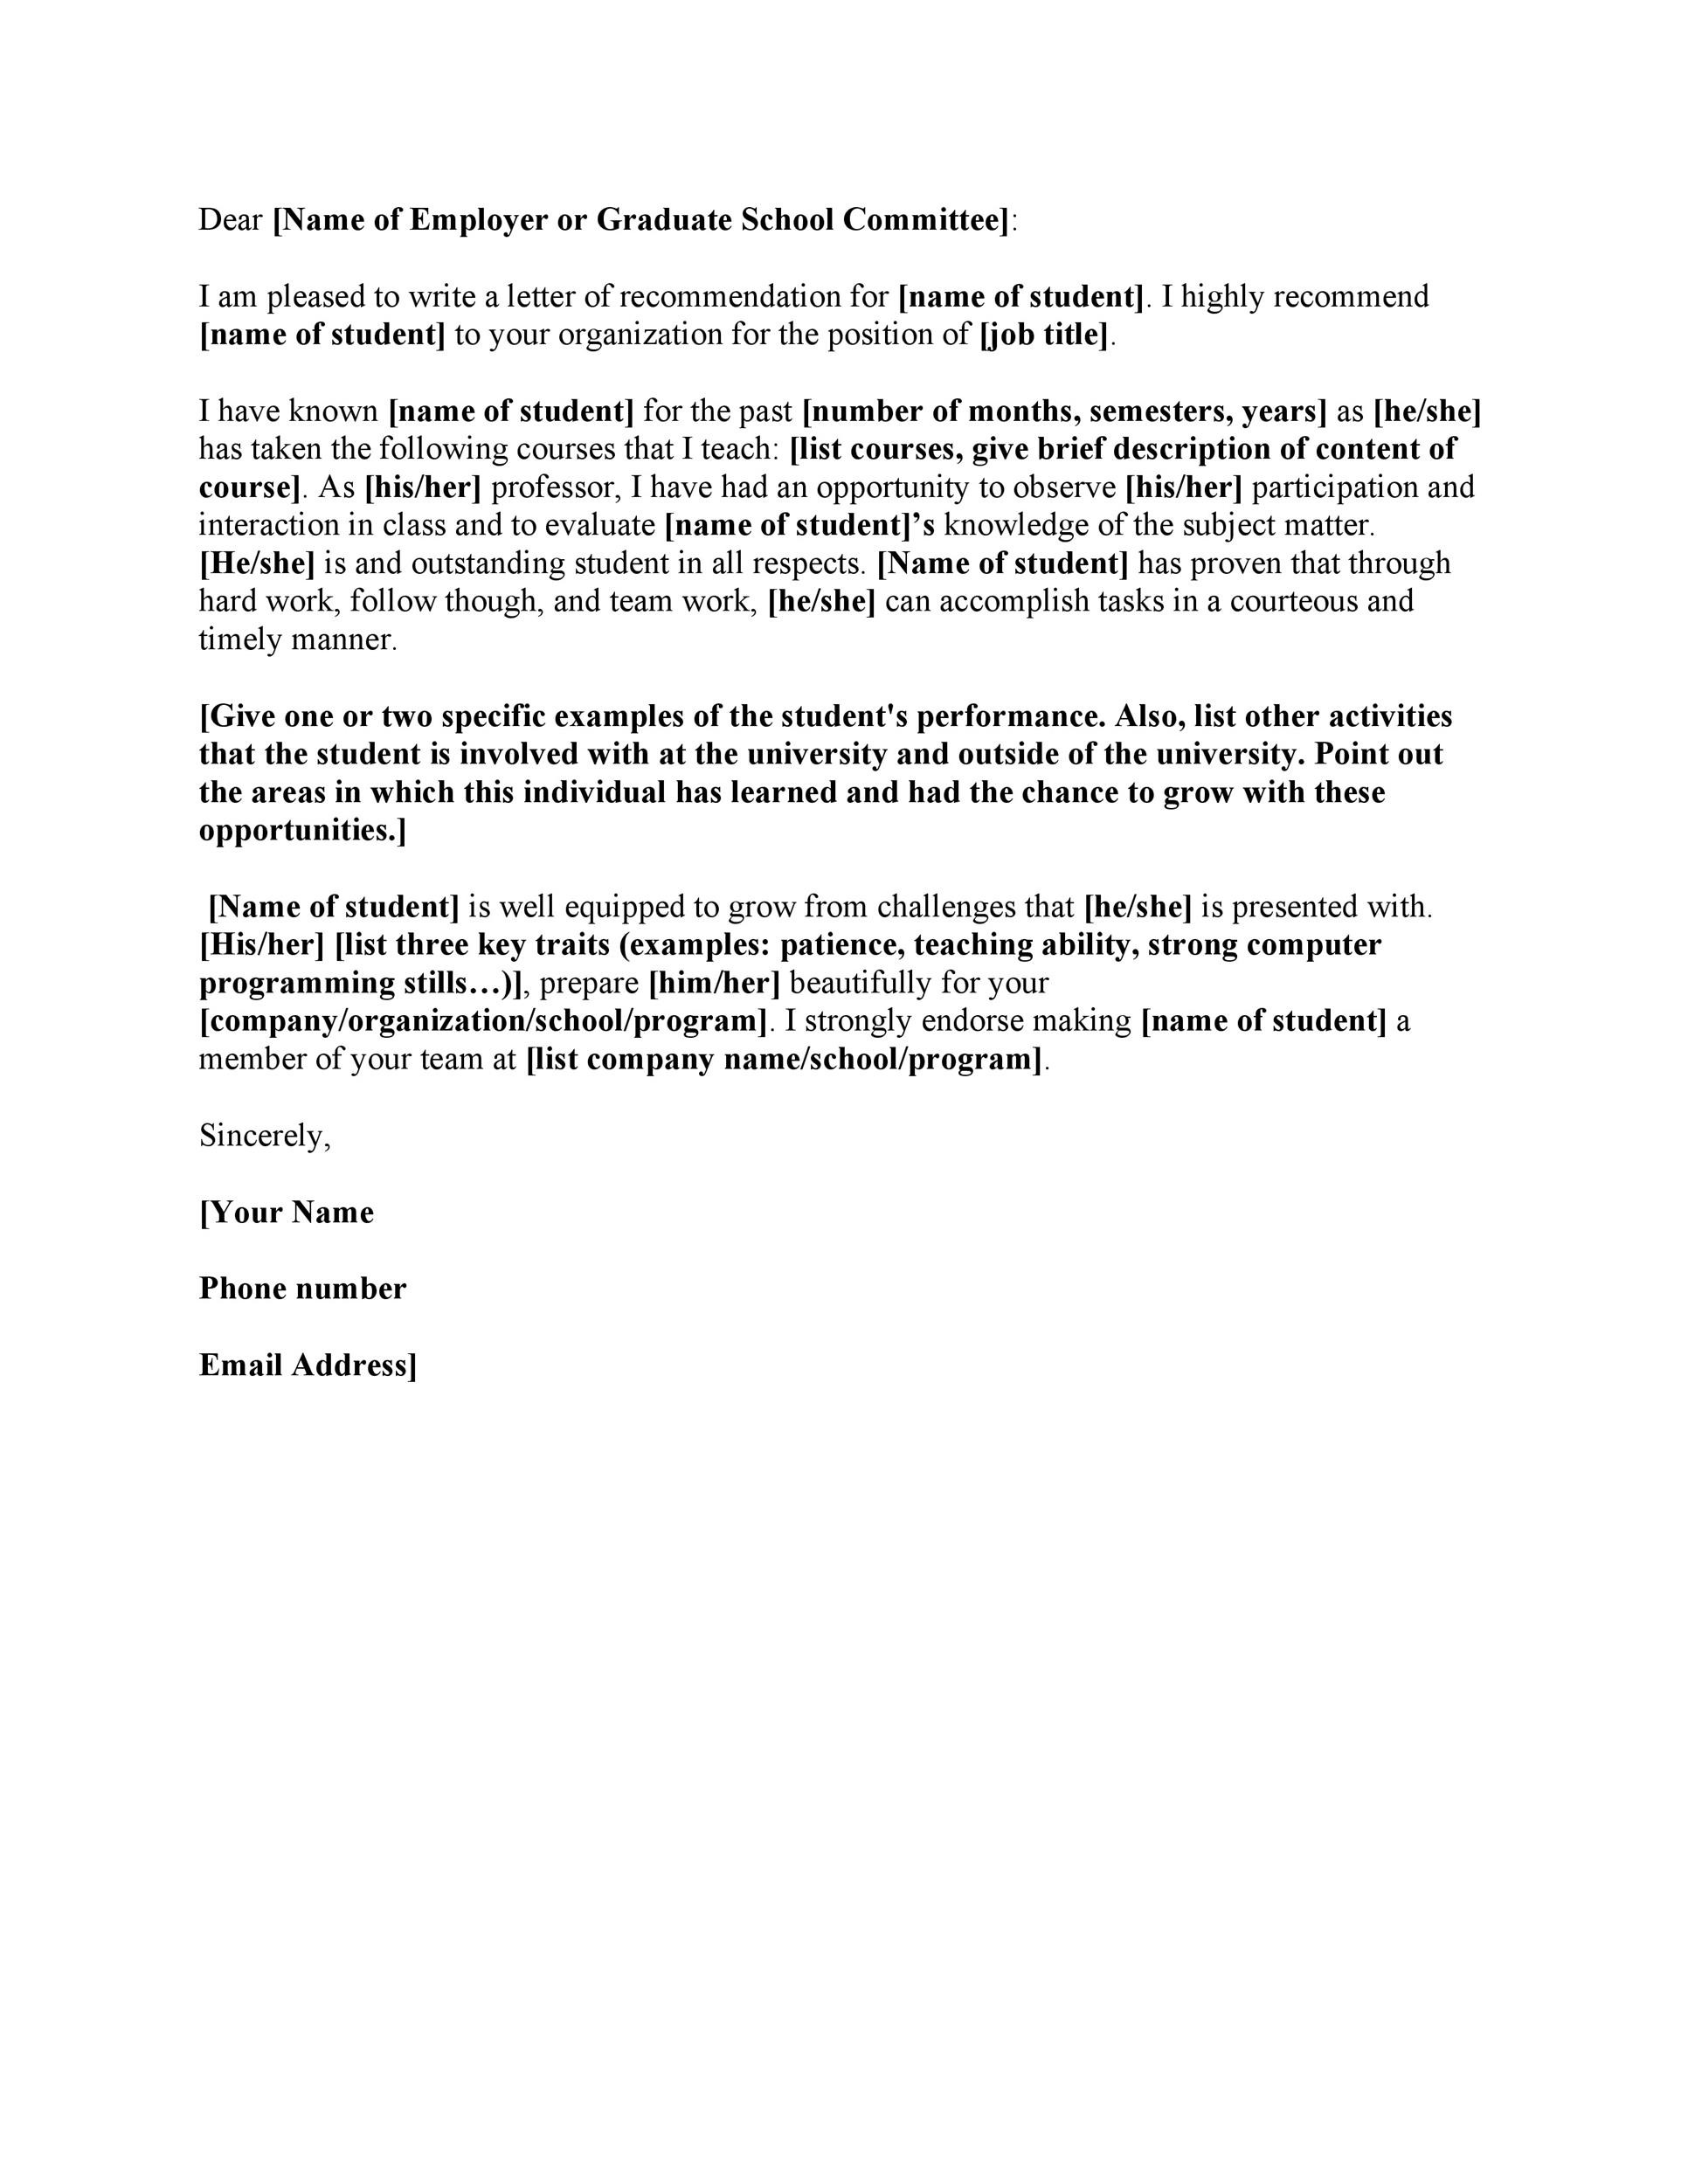 Draft Letter Of Recommendation For Yourself from templatelab.com